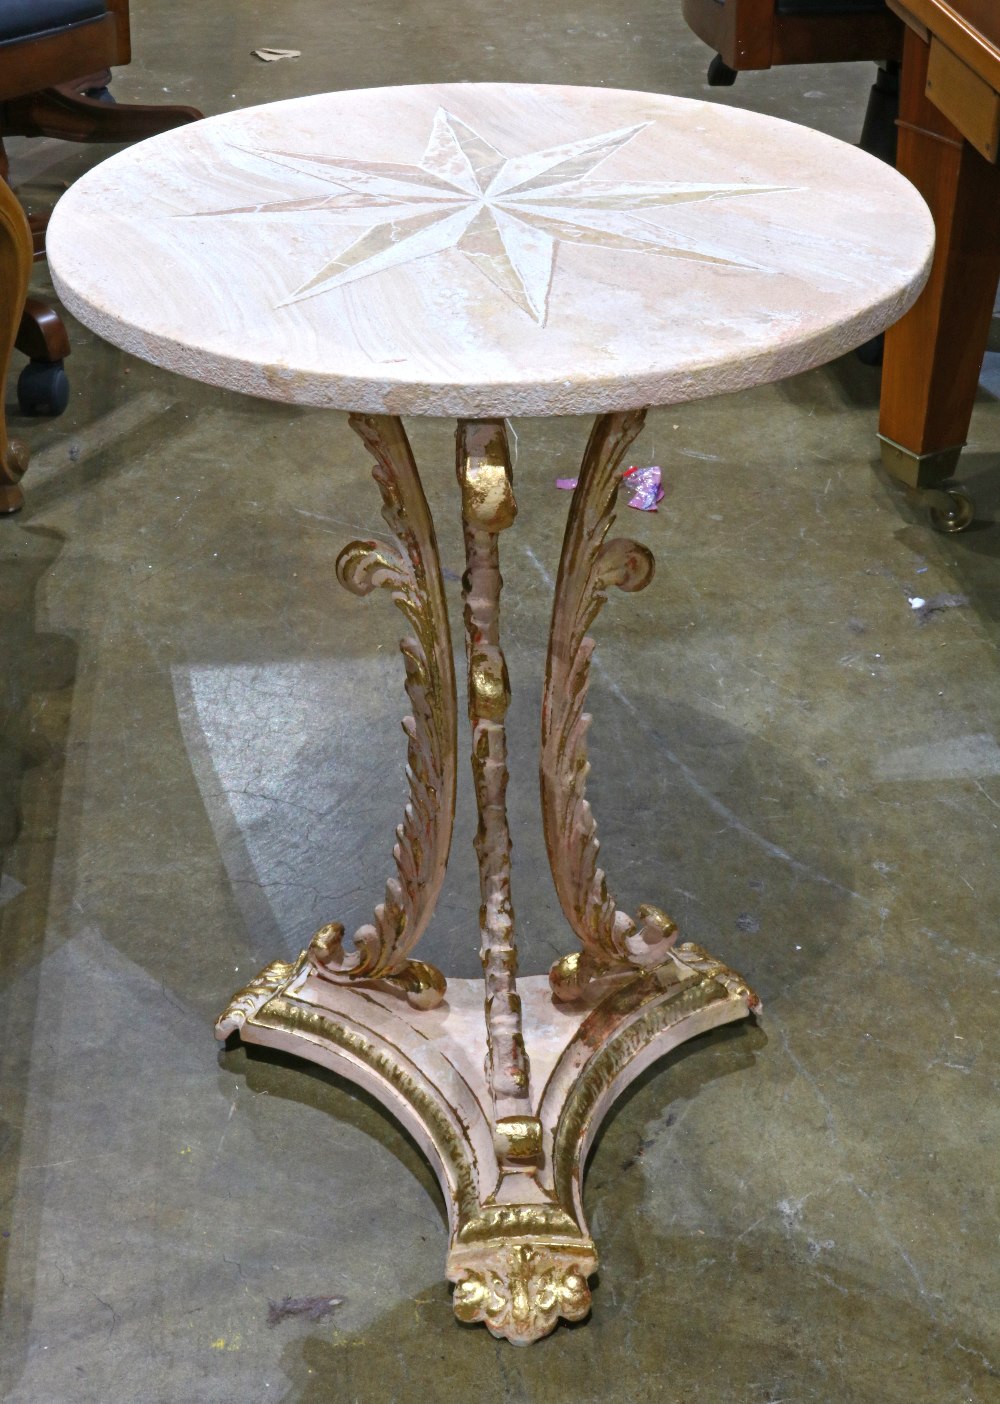 Regency style partial gilt conservatory table, executed in metal, having a faux paint decorated